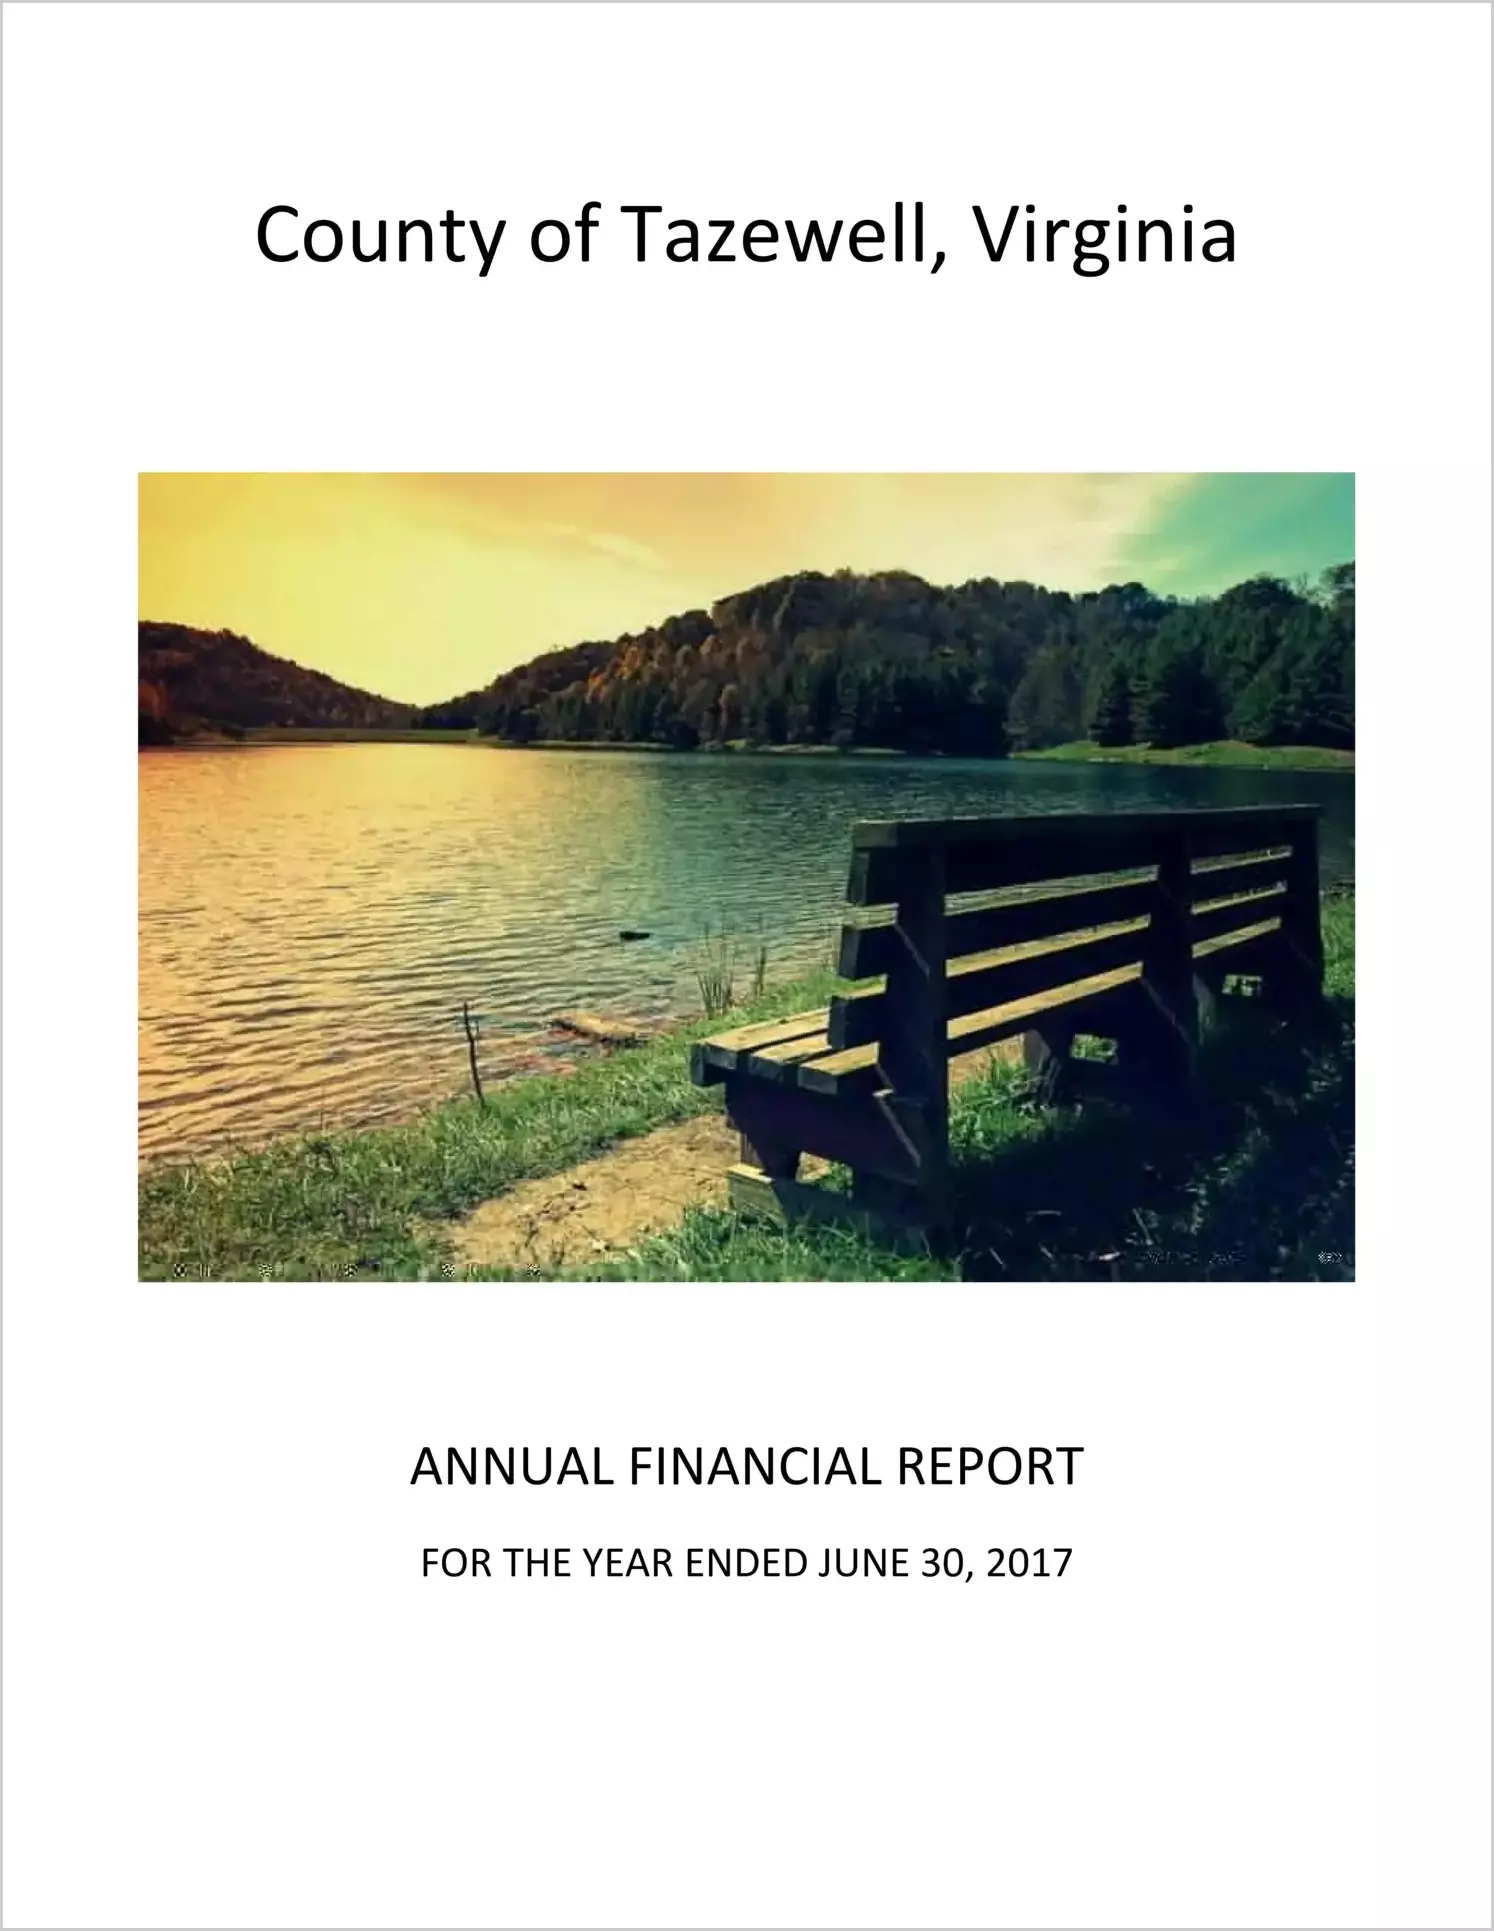 2017 Annual Financial Report for County of Tazewell